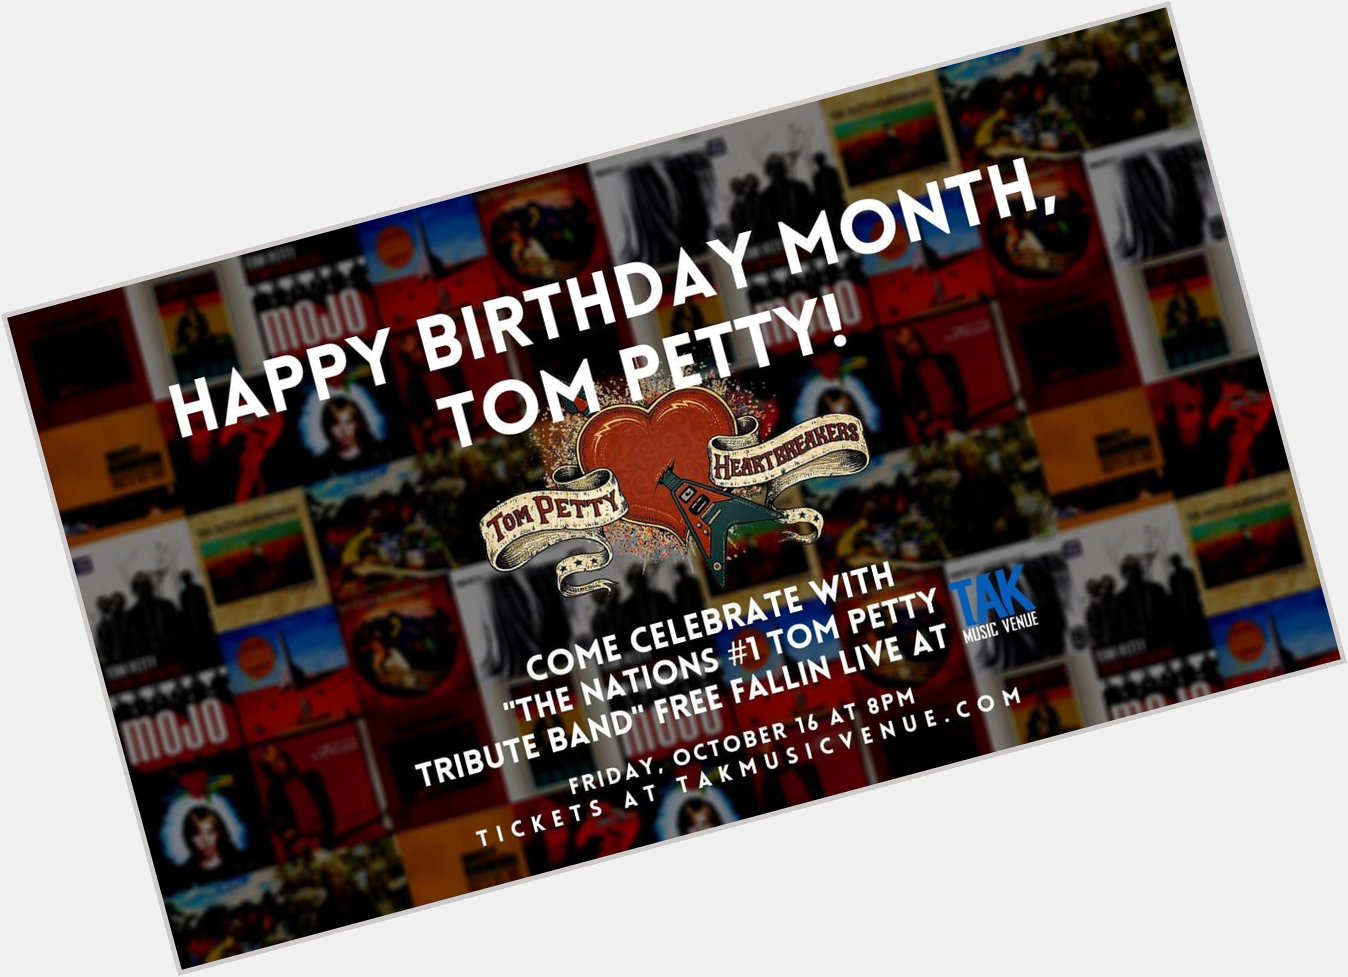 Happy Birthday Month, Tom Petty! Remessage fans! 